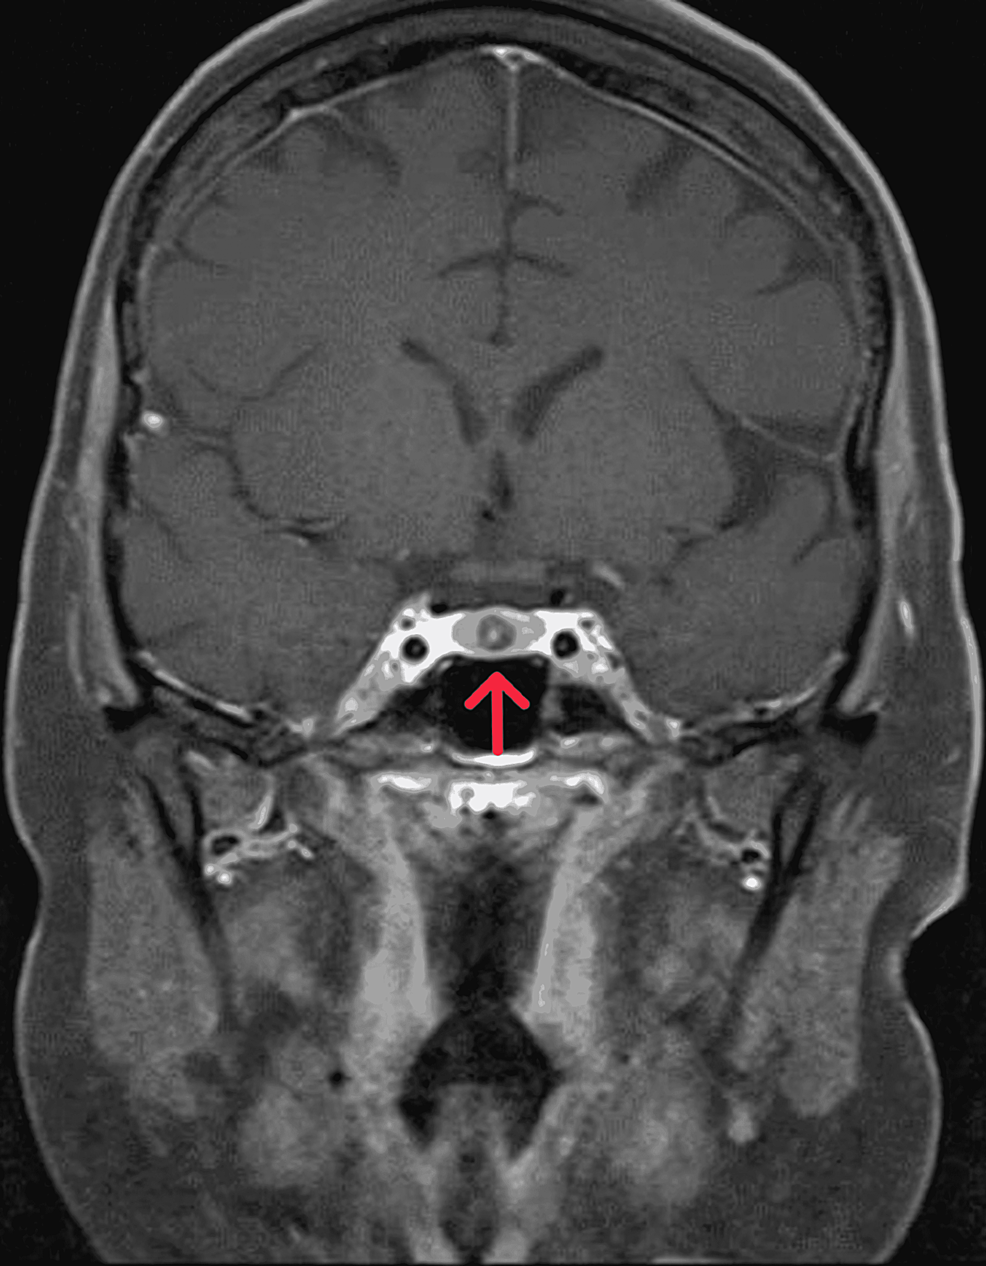 Coronal-T1-weighted-MRI-of-the-pituitary-gland-with-contrast-showed-a-hypoenhancing-nodular-lesion-at-the-midline-of-the-anterior-pituitary,-with-mild-eccentric-to-the-right